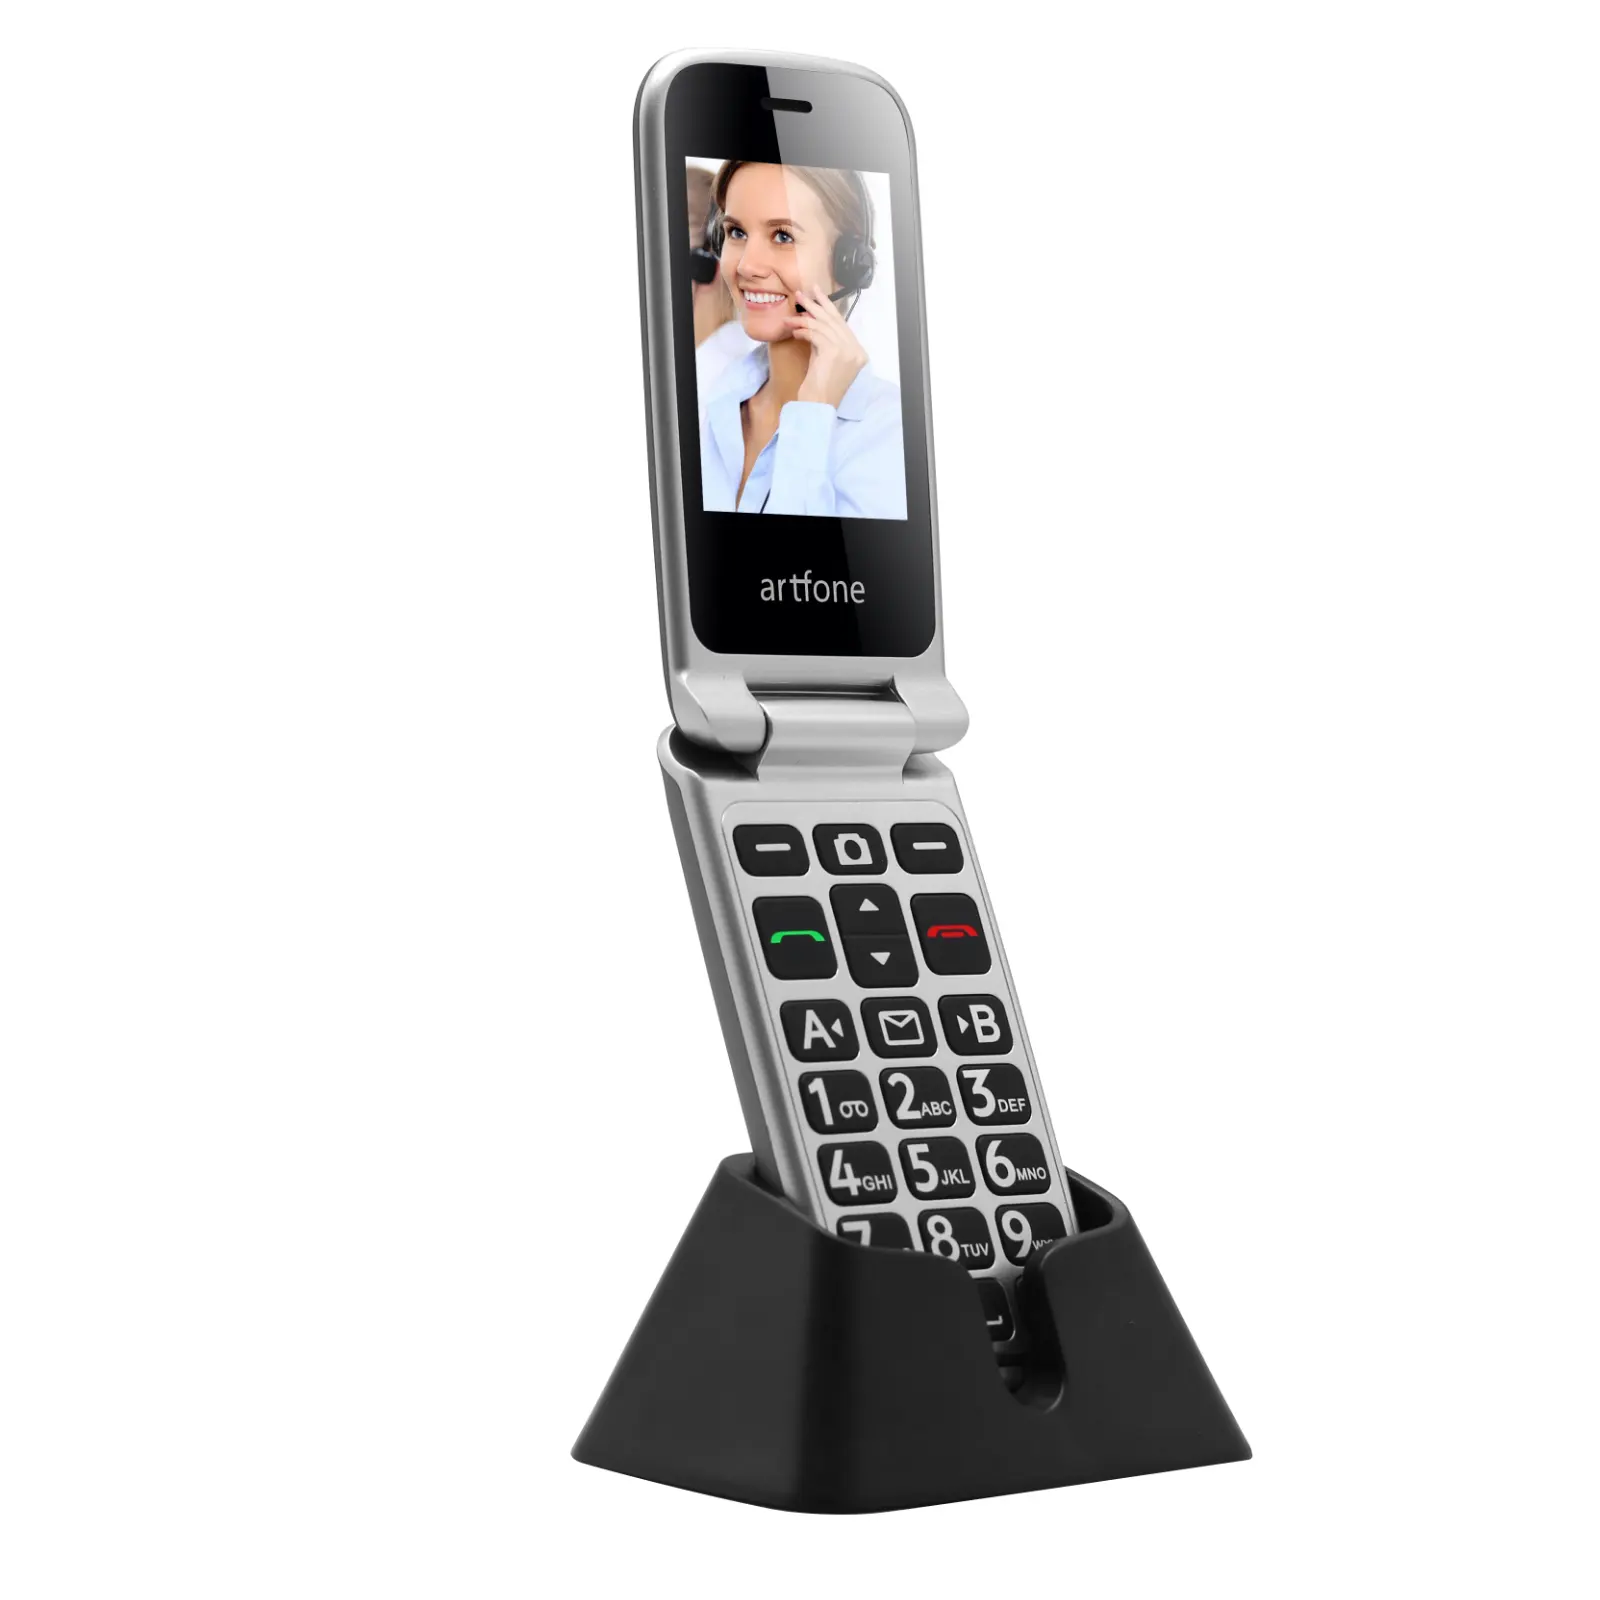 2MP Camera China Makes Cheap Moblie Keyboard Phone Cell Phone With Keyboard